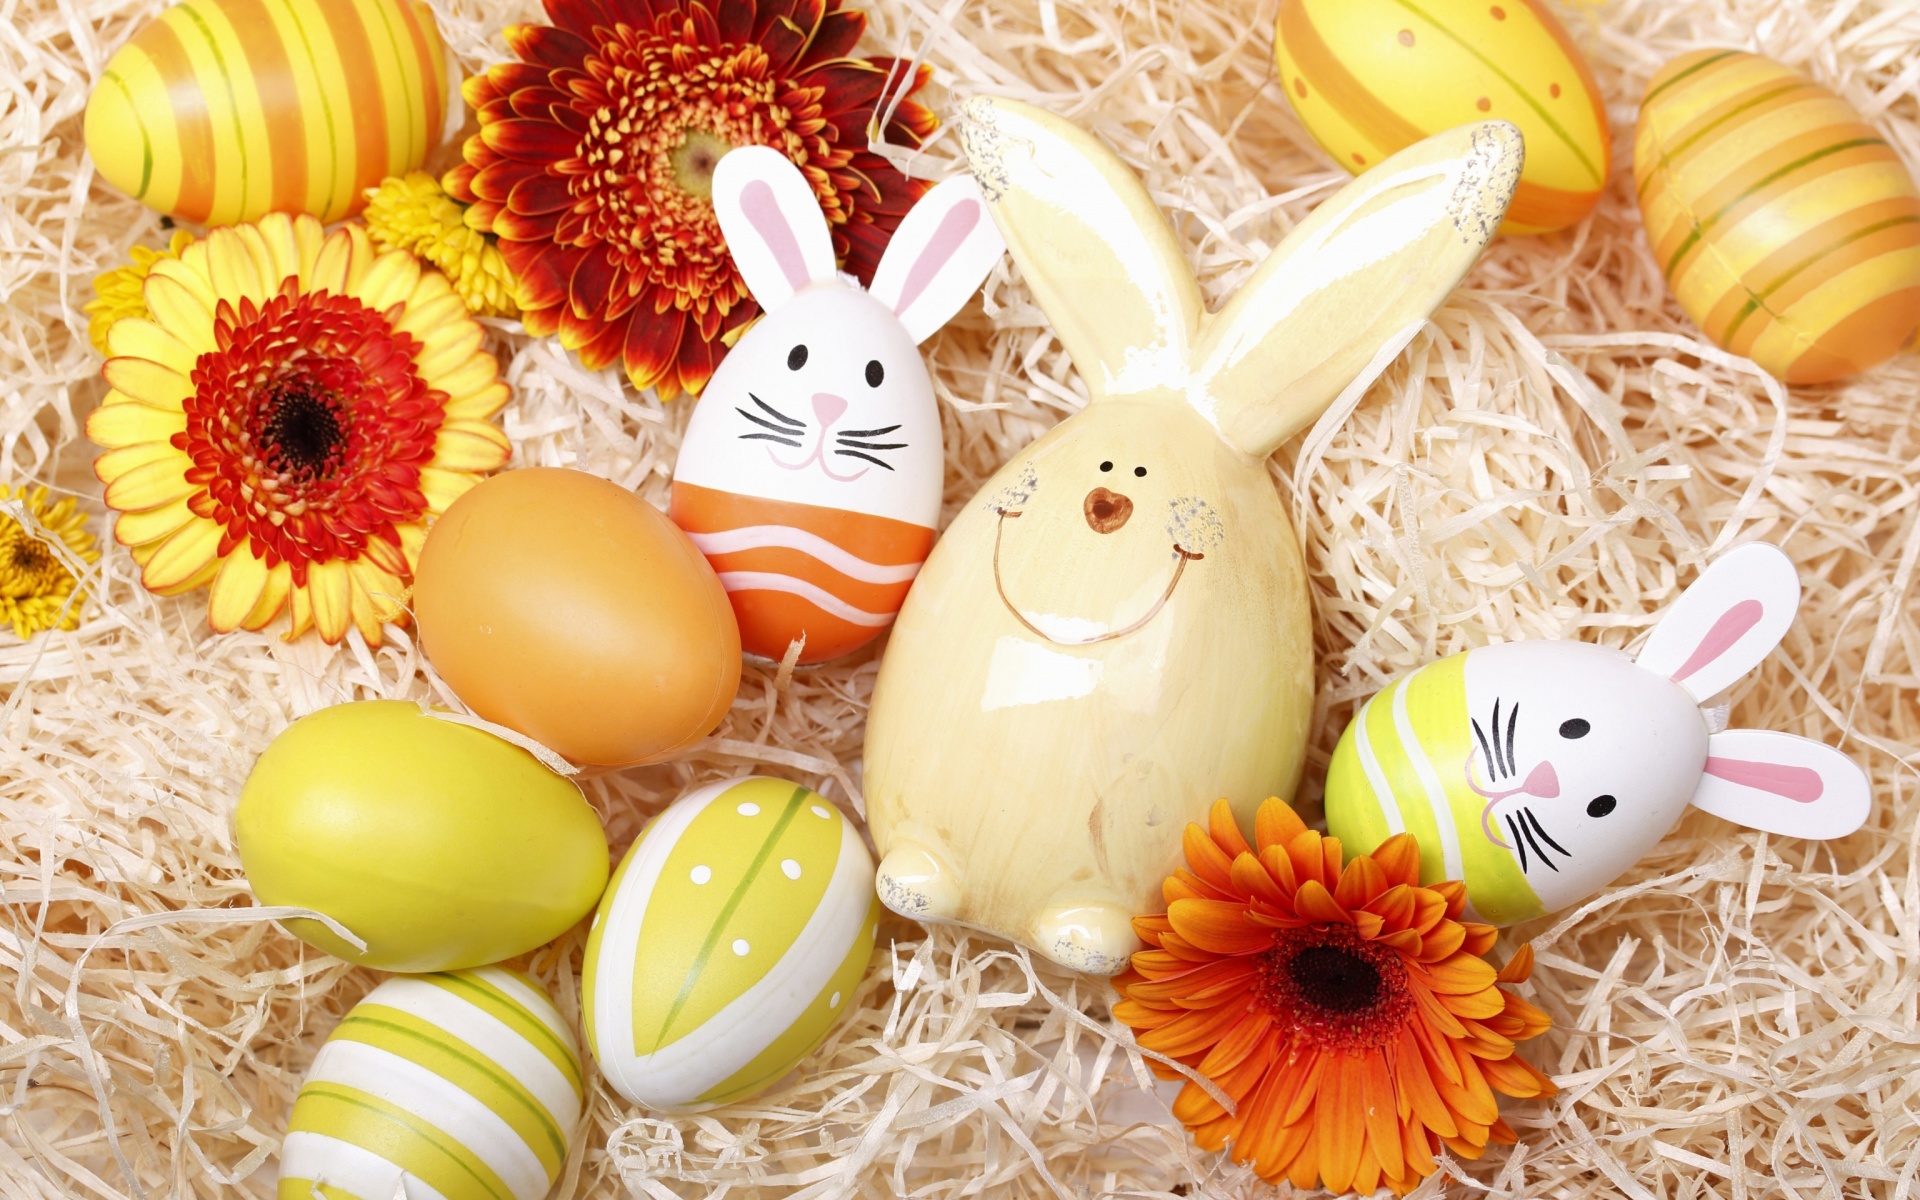 Das Easter Eggs Decoration with Hare Wallpaper 1920x1200